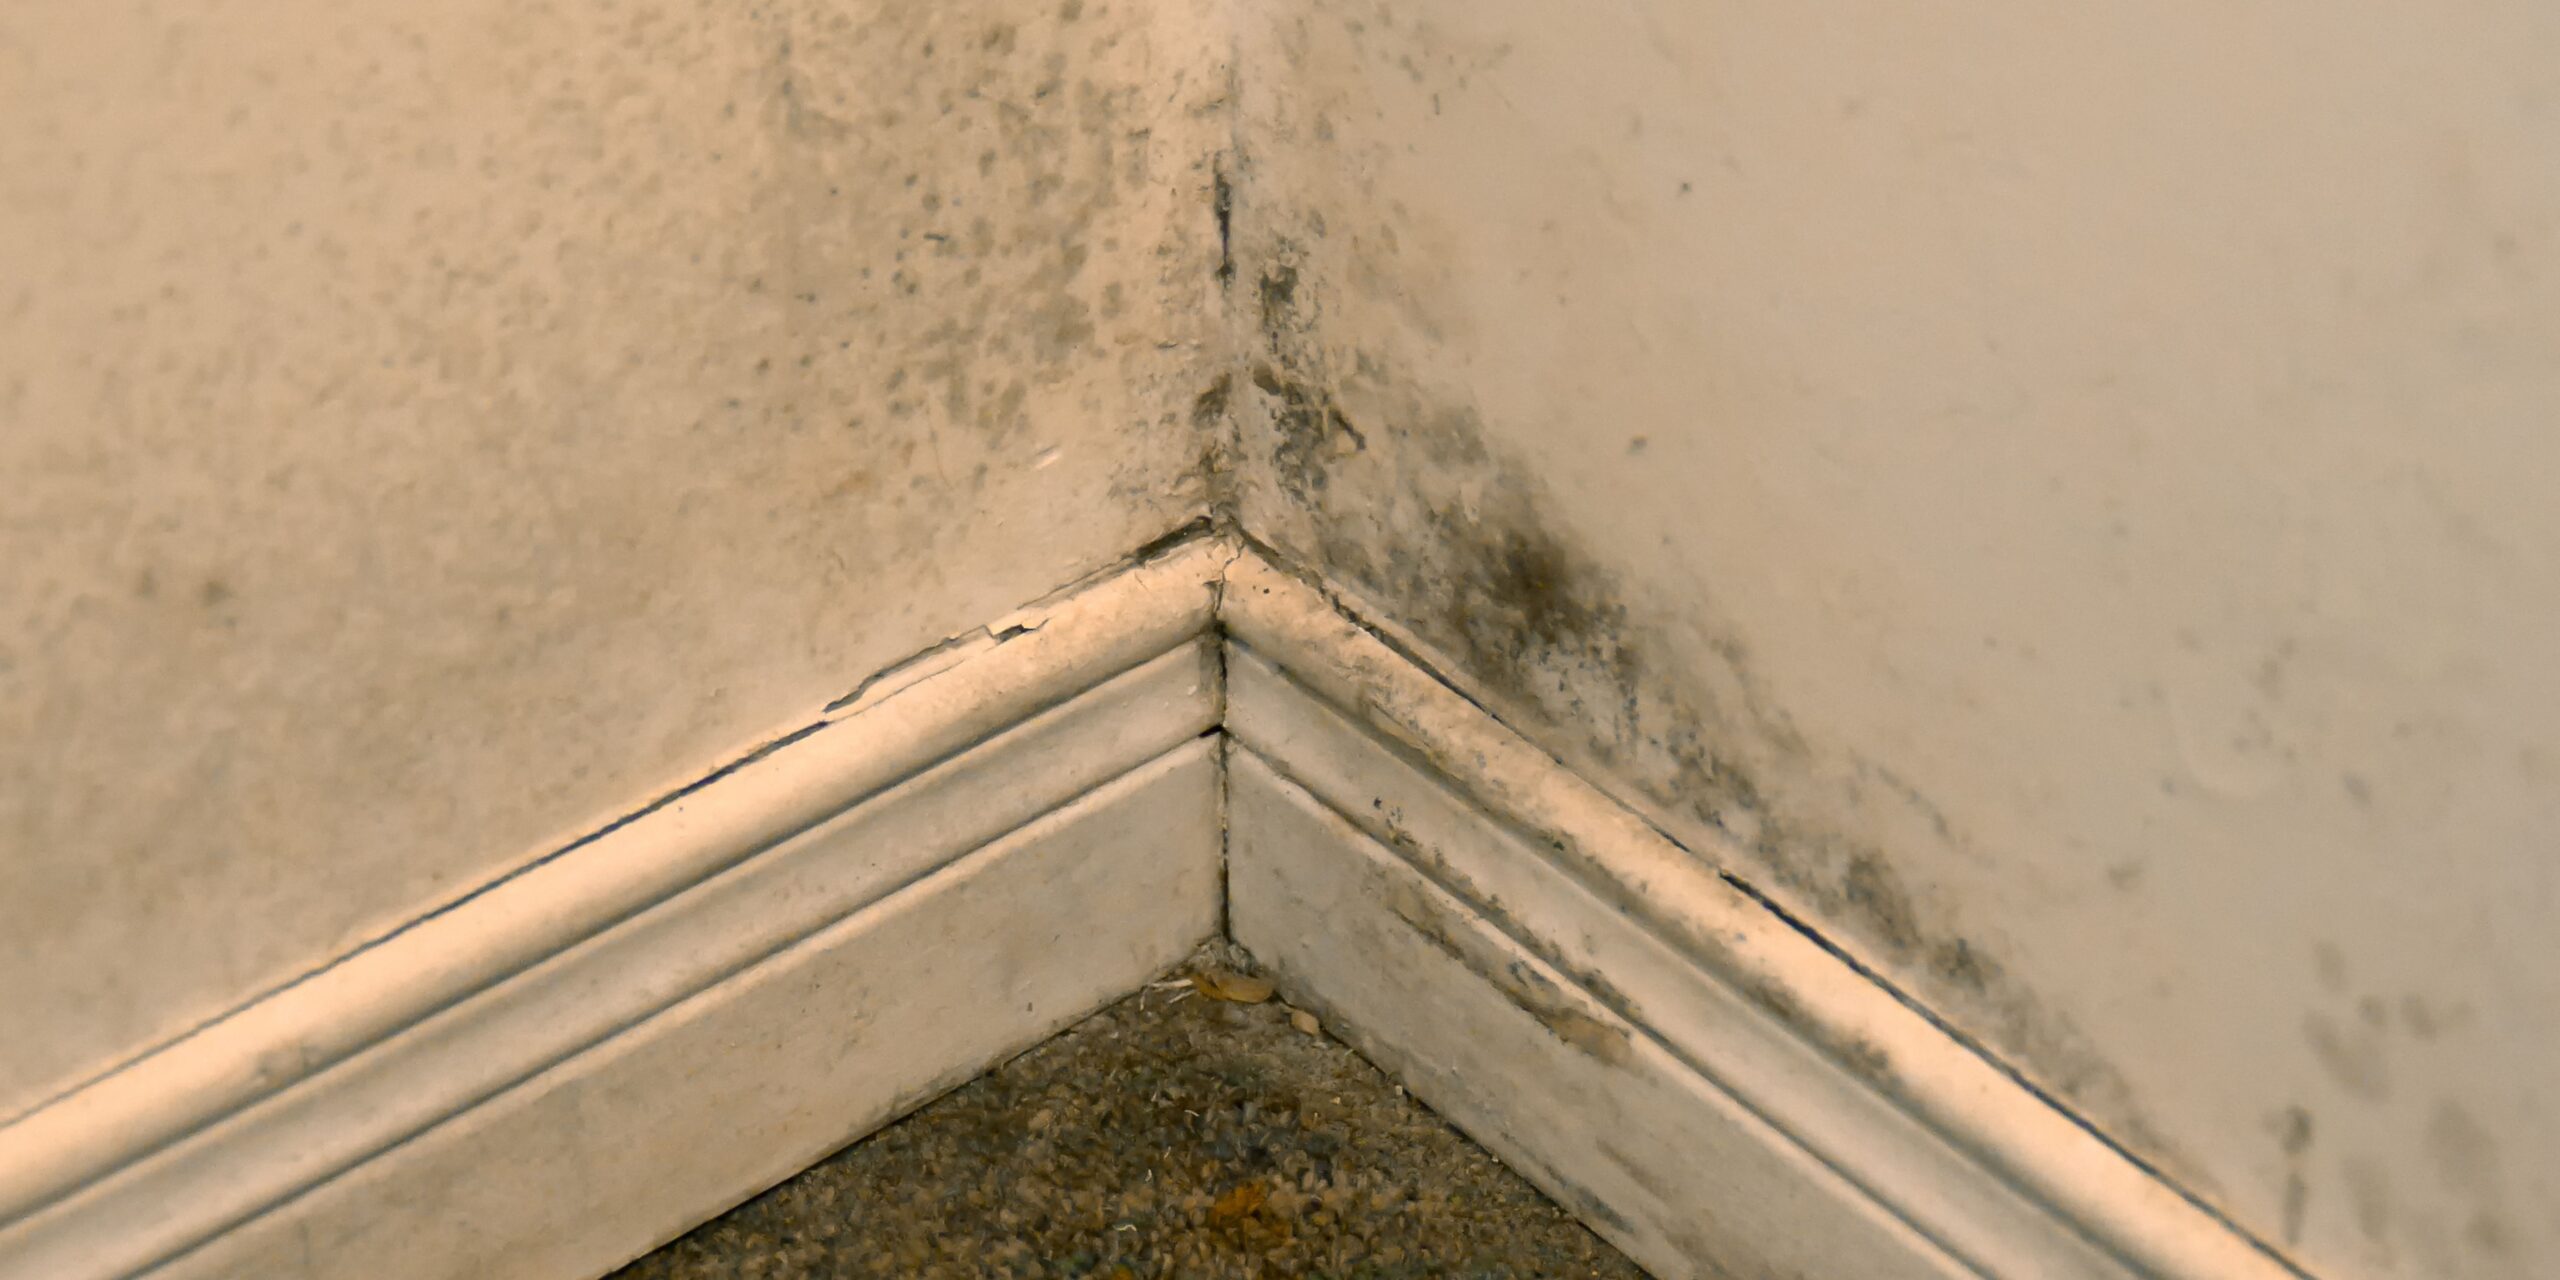 Hacks to Get Rid of Mold Smell